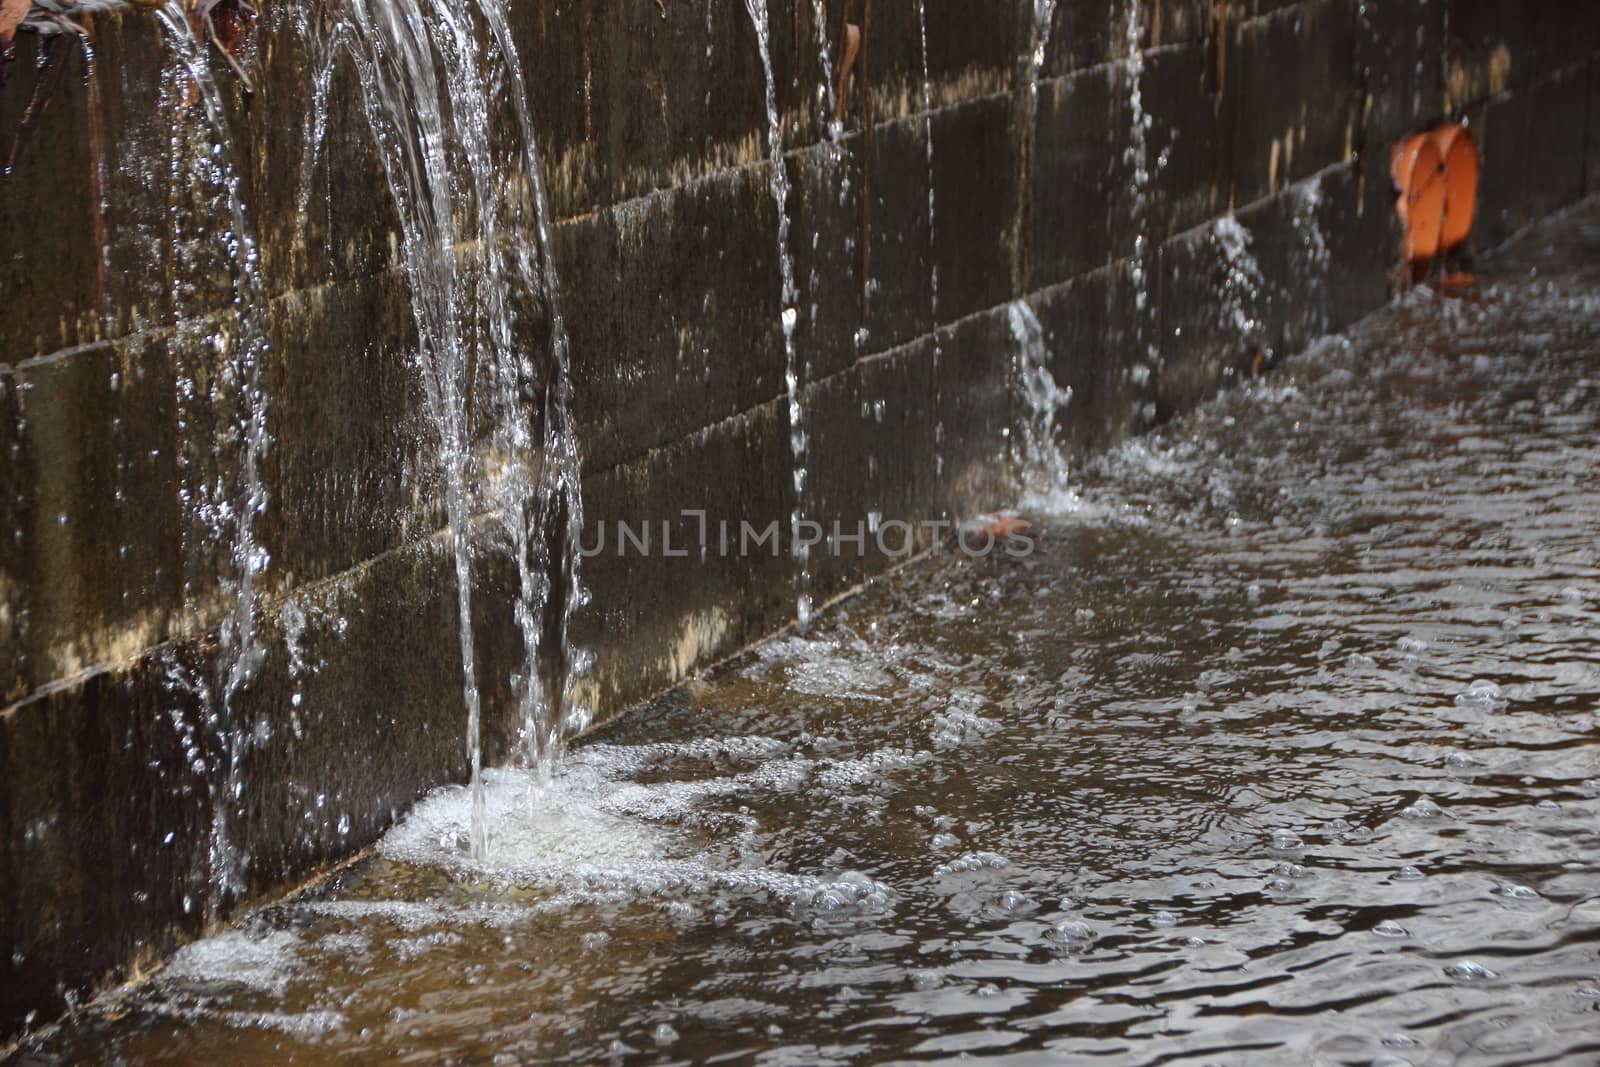 Embankment under Water Pressure with Water Spraying and creating small waterfall